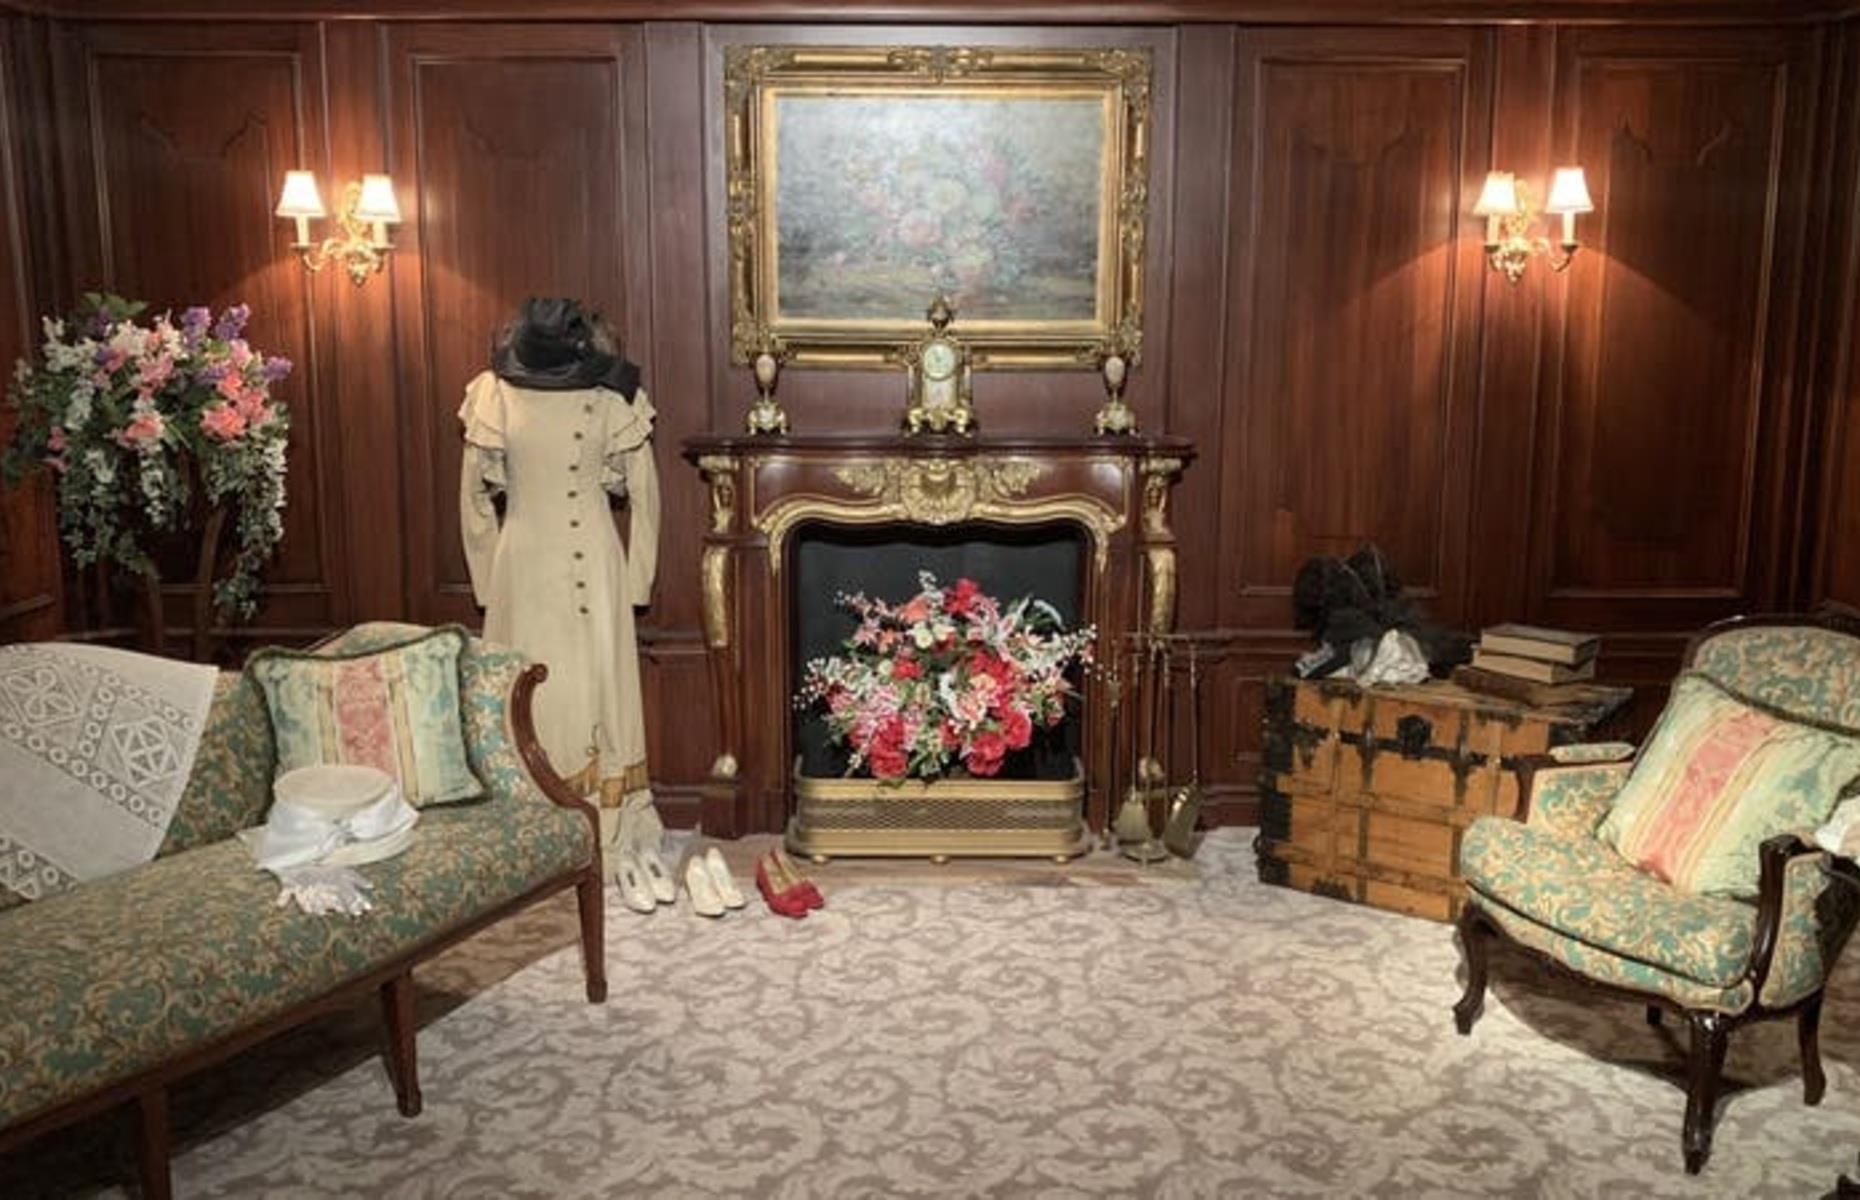 <p>Orlando's The Titanic Artifact Exhibition is home to more than 300 artefacts that were brought up from the wreck of the Titanic. In <a href="http://titanicorlando.com/">the evocative attractio</a><a href="http://titanicorlando.com/">n</a>, visitors can peruse personal items such as mirrors, combs, shoes and jewellery as well as authentic ship artefacts such as crockery, deck chairs, binoculars and parts of the hull. A two-hour guided tour explains all of the items in detail. Other tours include the Ship of Dreams, which explores how the Titanic was built and the Kids’ Tour where a costumed guide takes little ones on a scavenger hunt with an adventure map.</p>  <p><strong><a href="https://www.loveexploring.com/news/116974/interview-robert-ballard-titanic-discovery-scientist">'I discovered Titanic on a Cold War mission': read our incredible interview with Robert Ballard</a></strong></p>